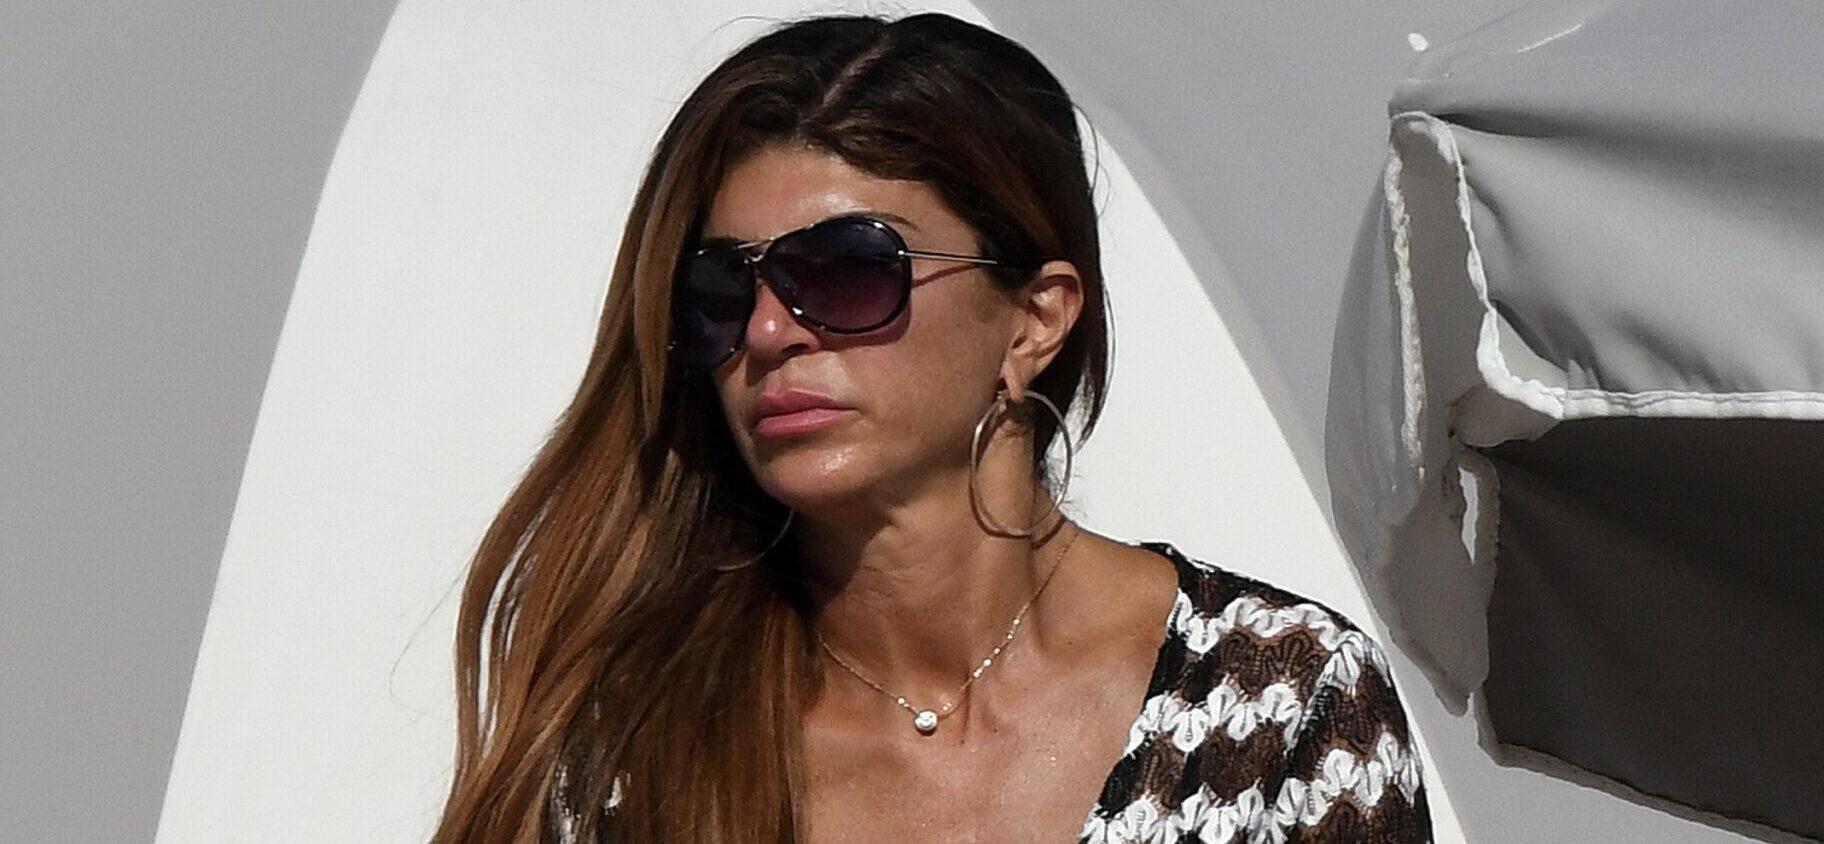 Teresa Giudice today linked to a handsome young toy boy wears a revealing crochet swimsuit on the beach in Miami